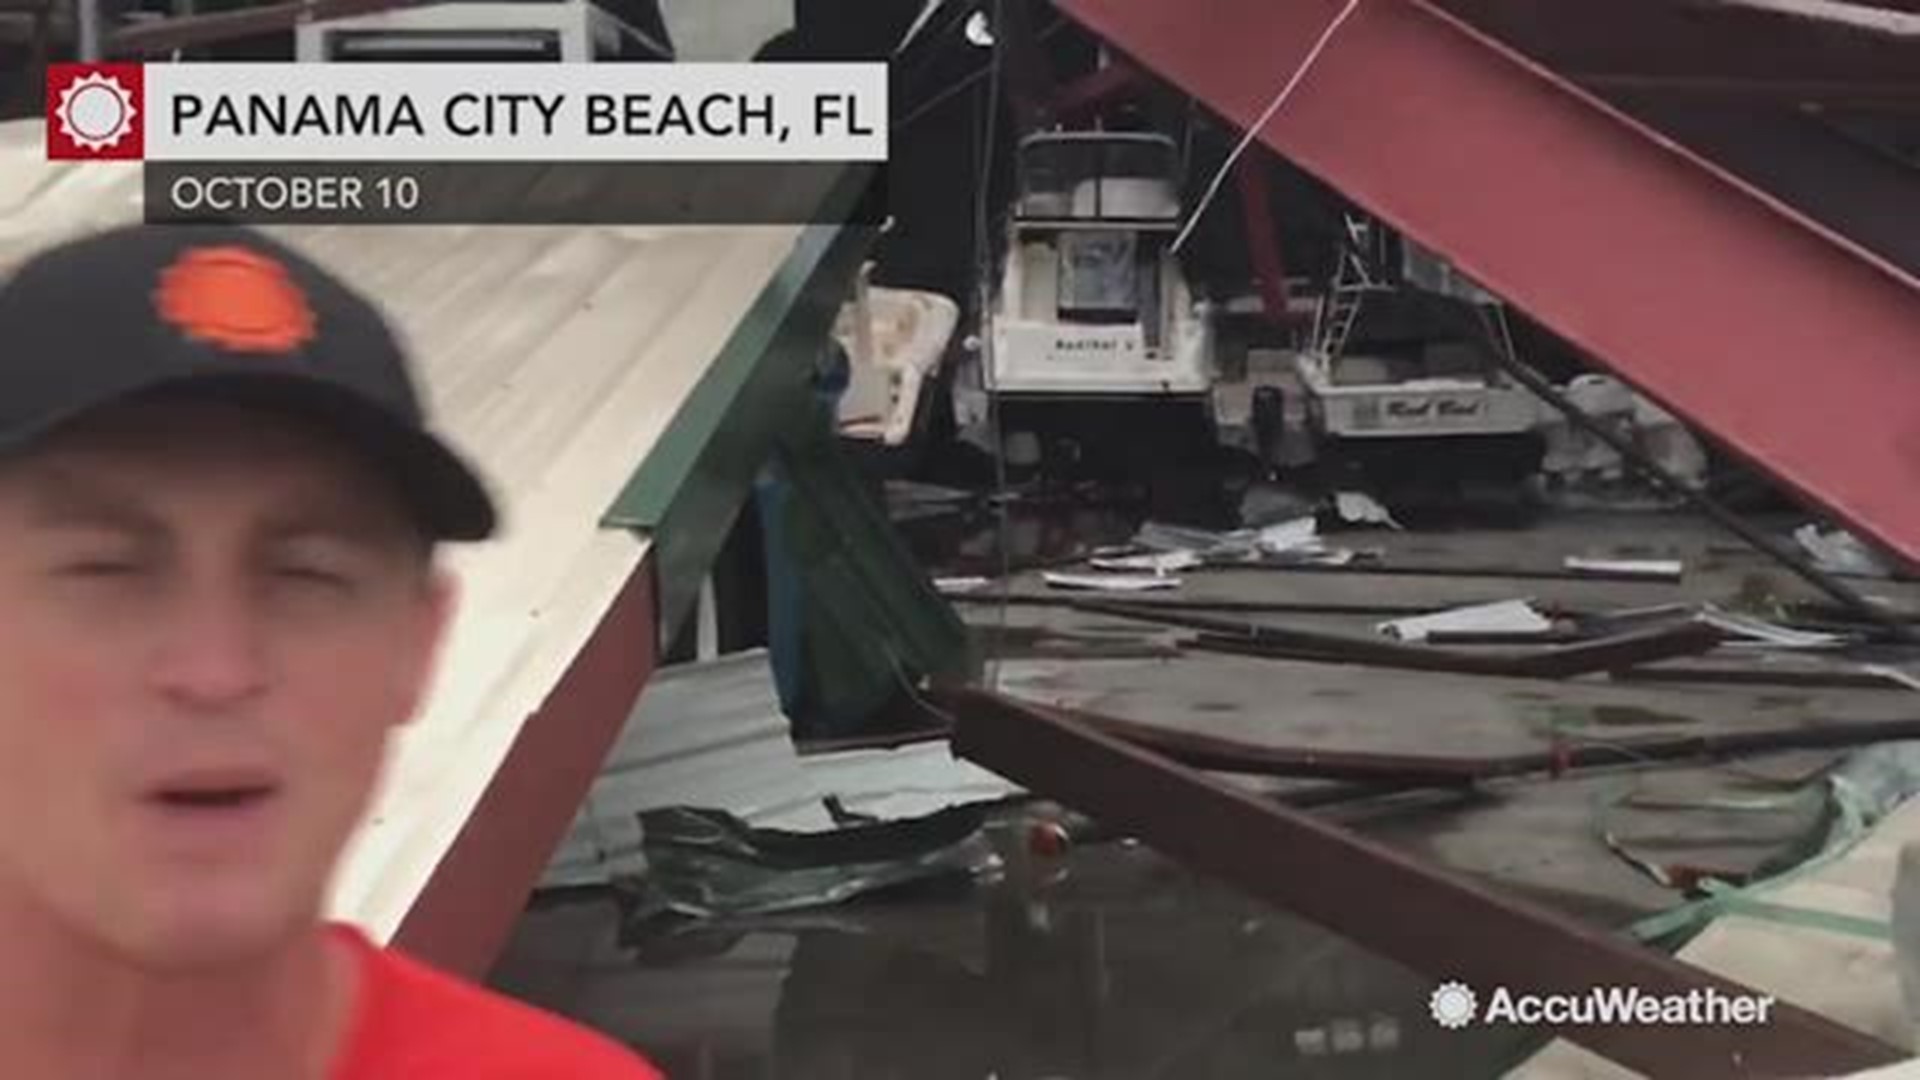 What is left of Panama City Beach, Florida after Hurricane Michael made landfall is widespread devastation as AccuWeather reporter Jonathan Petramala reports on the damage.